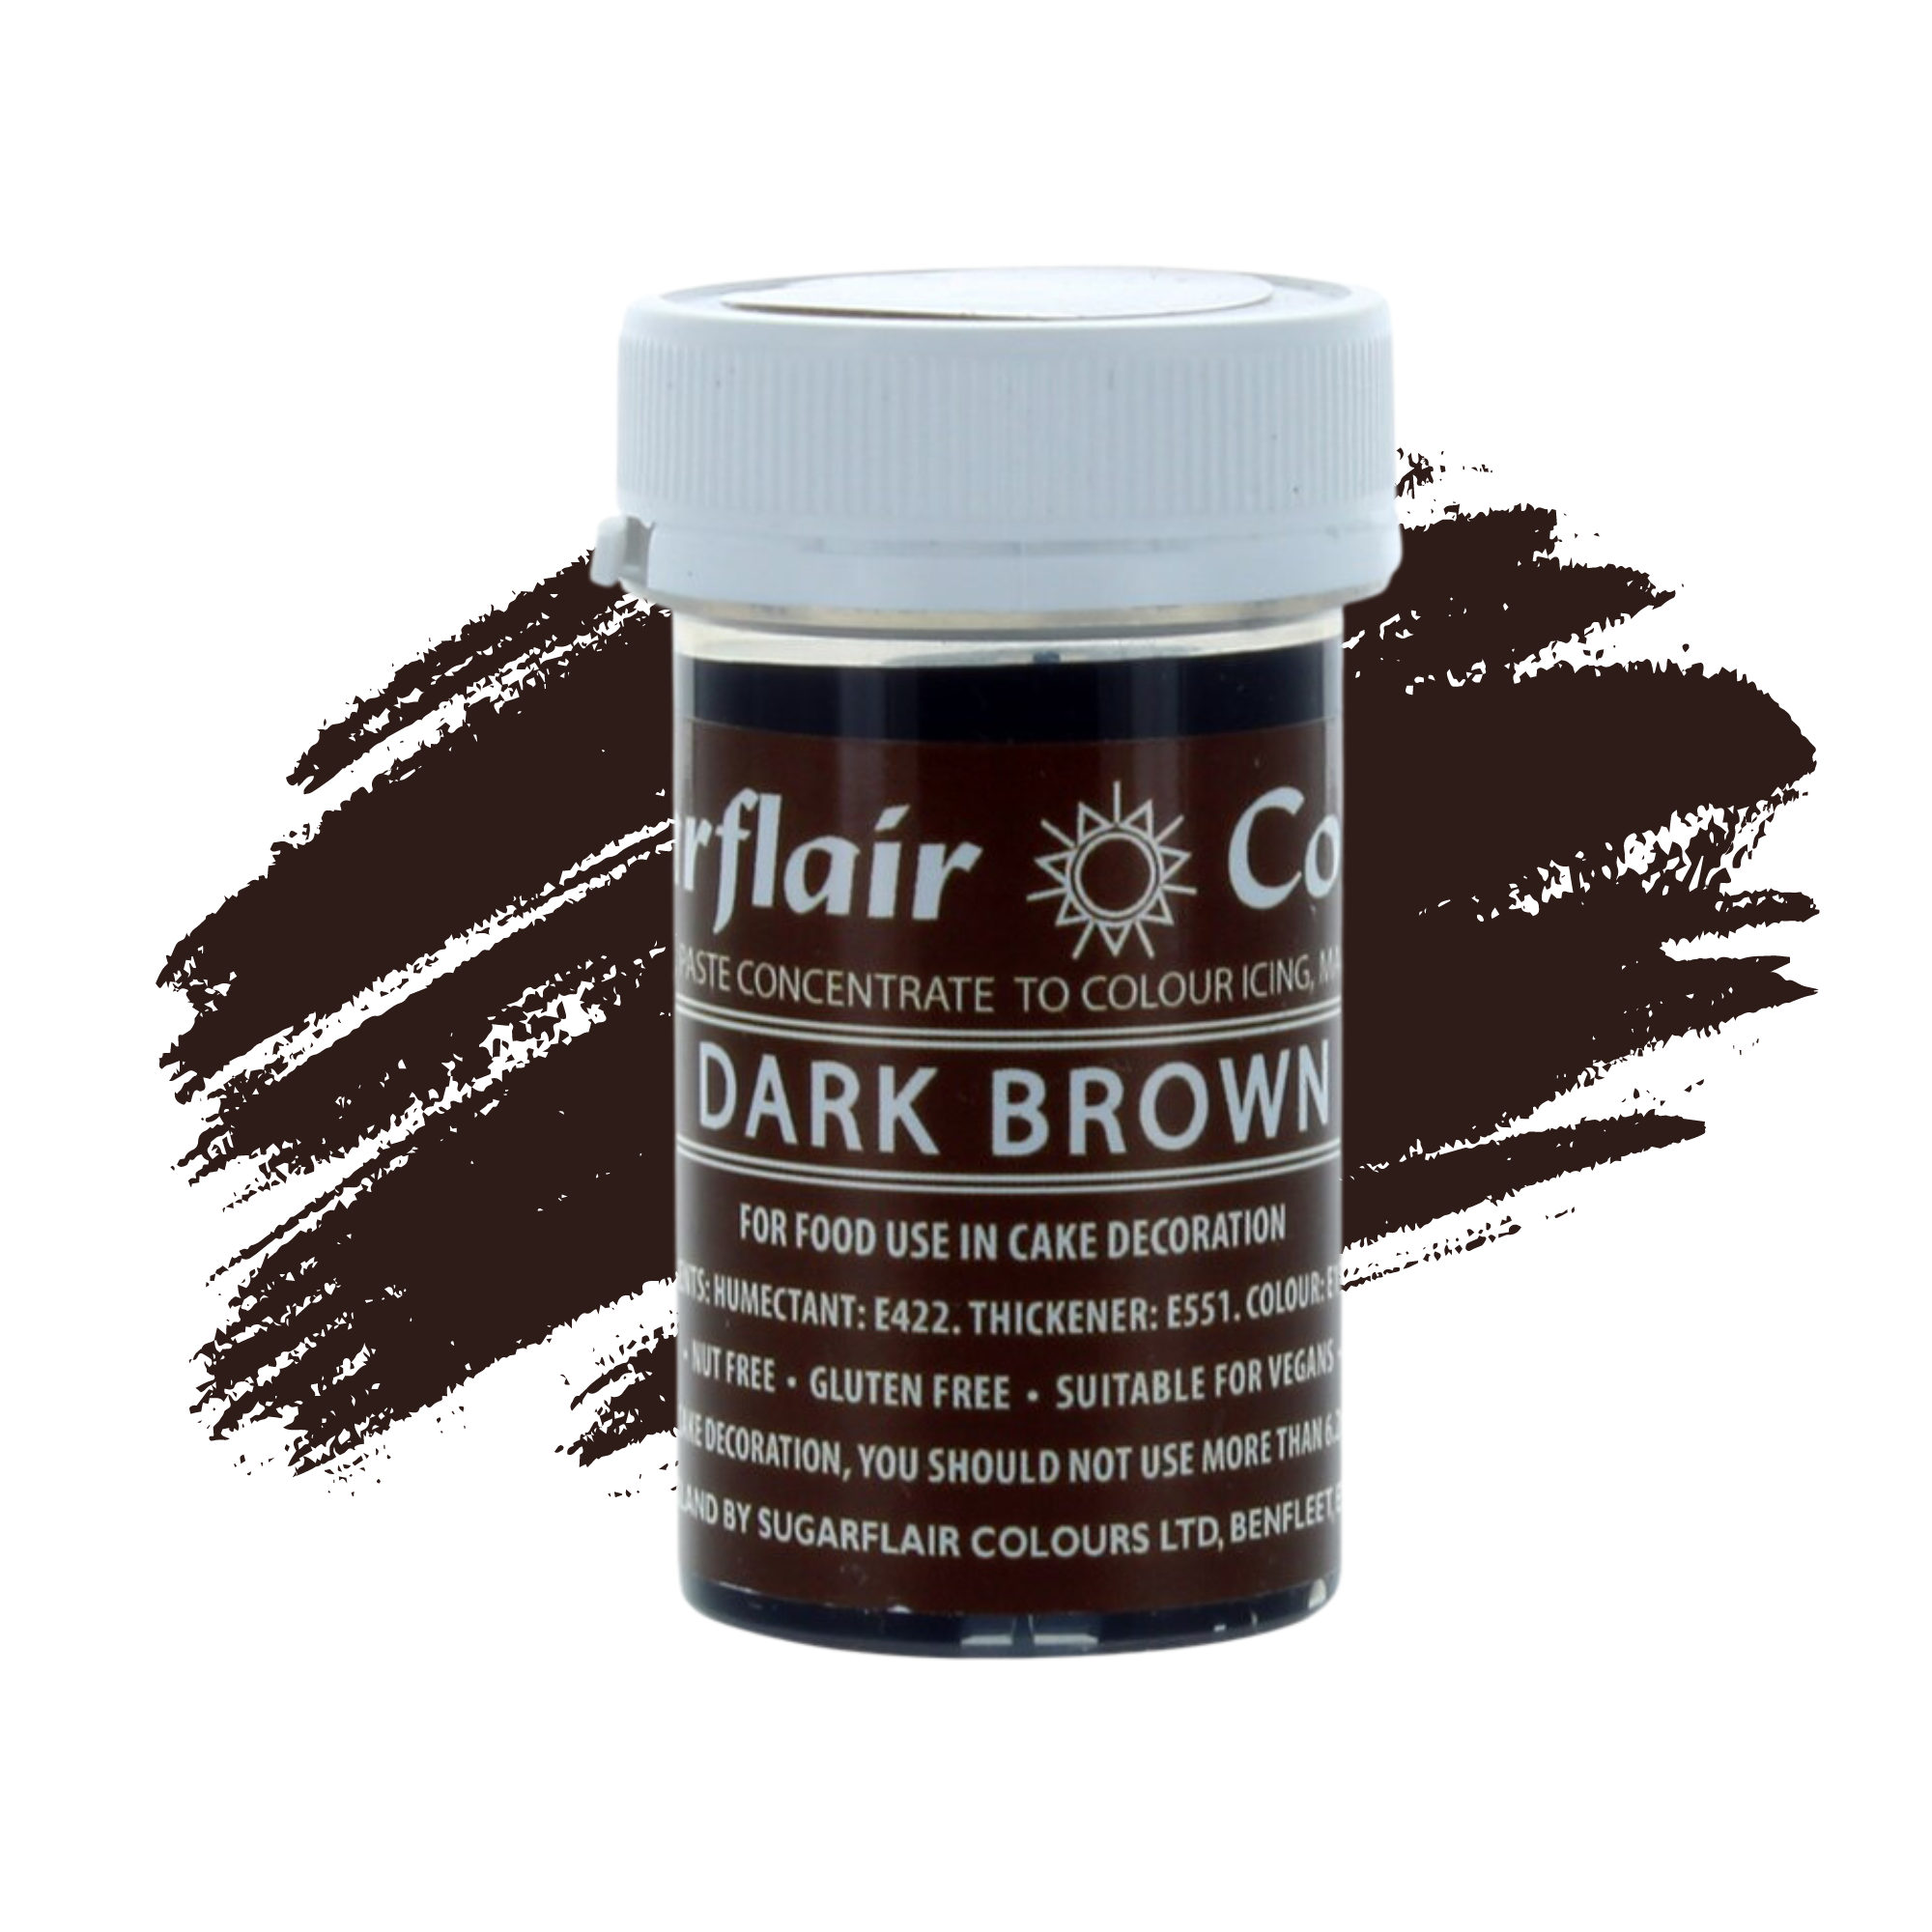 Sugarflair Paste Colours Concentrated Food Colouring - Spectral Dark Brown - 25g